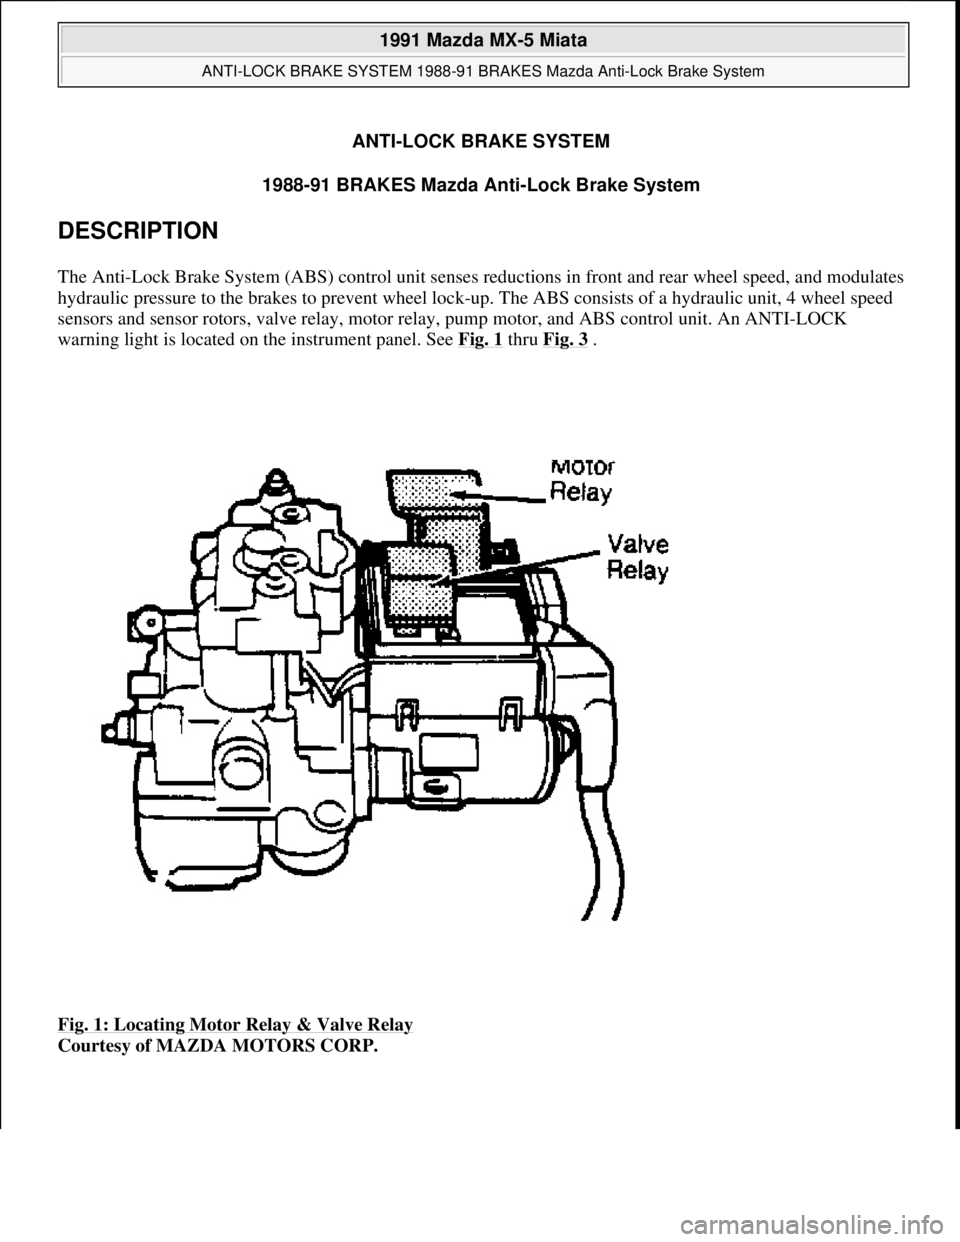 MAZDA MIATA 1991  Factory Service Manual ANTI-LOCK BRAKE SYSTEM
1988-91 BRAKES Mazda Anti-Lock Brake System 
DESCRIPTION 
The Anti-Lock Brake System (ABS) control unit senses reductions in front and rear wheel speed, and modulates 
hydraulic